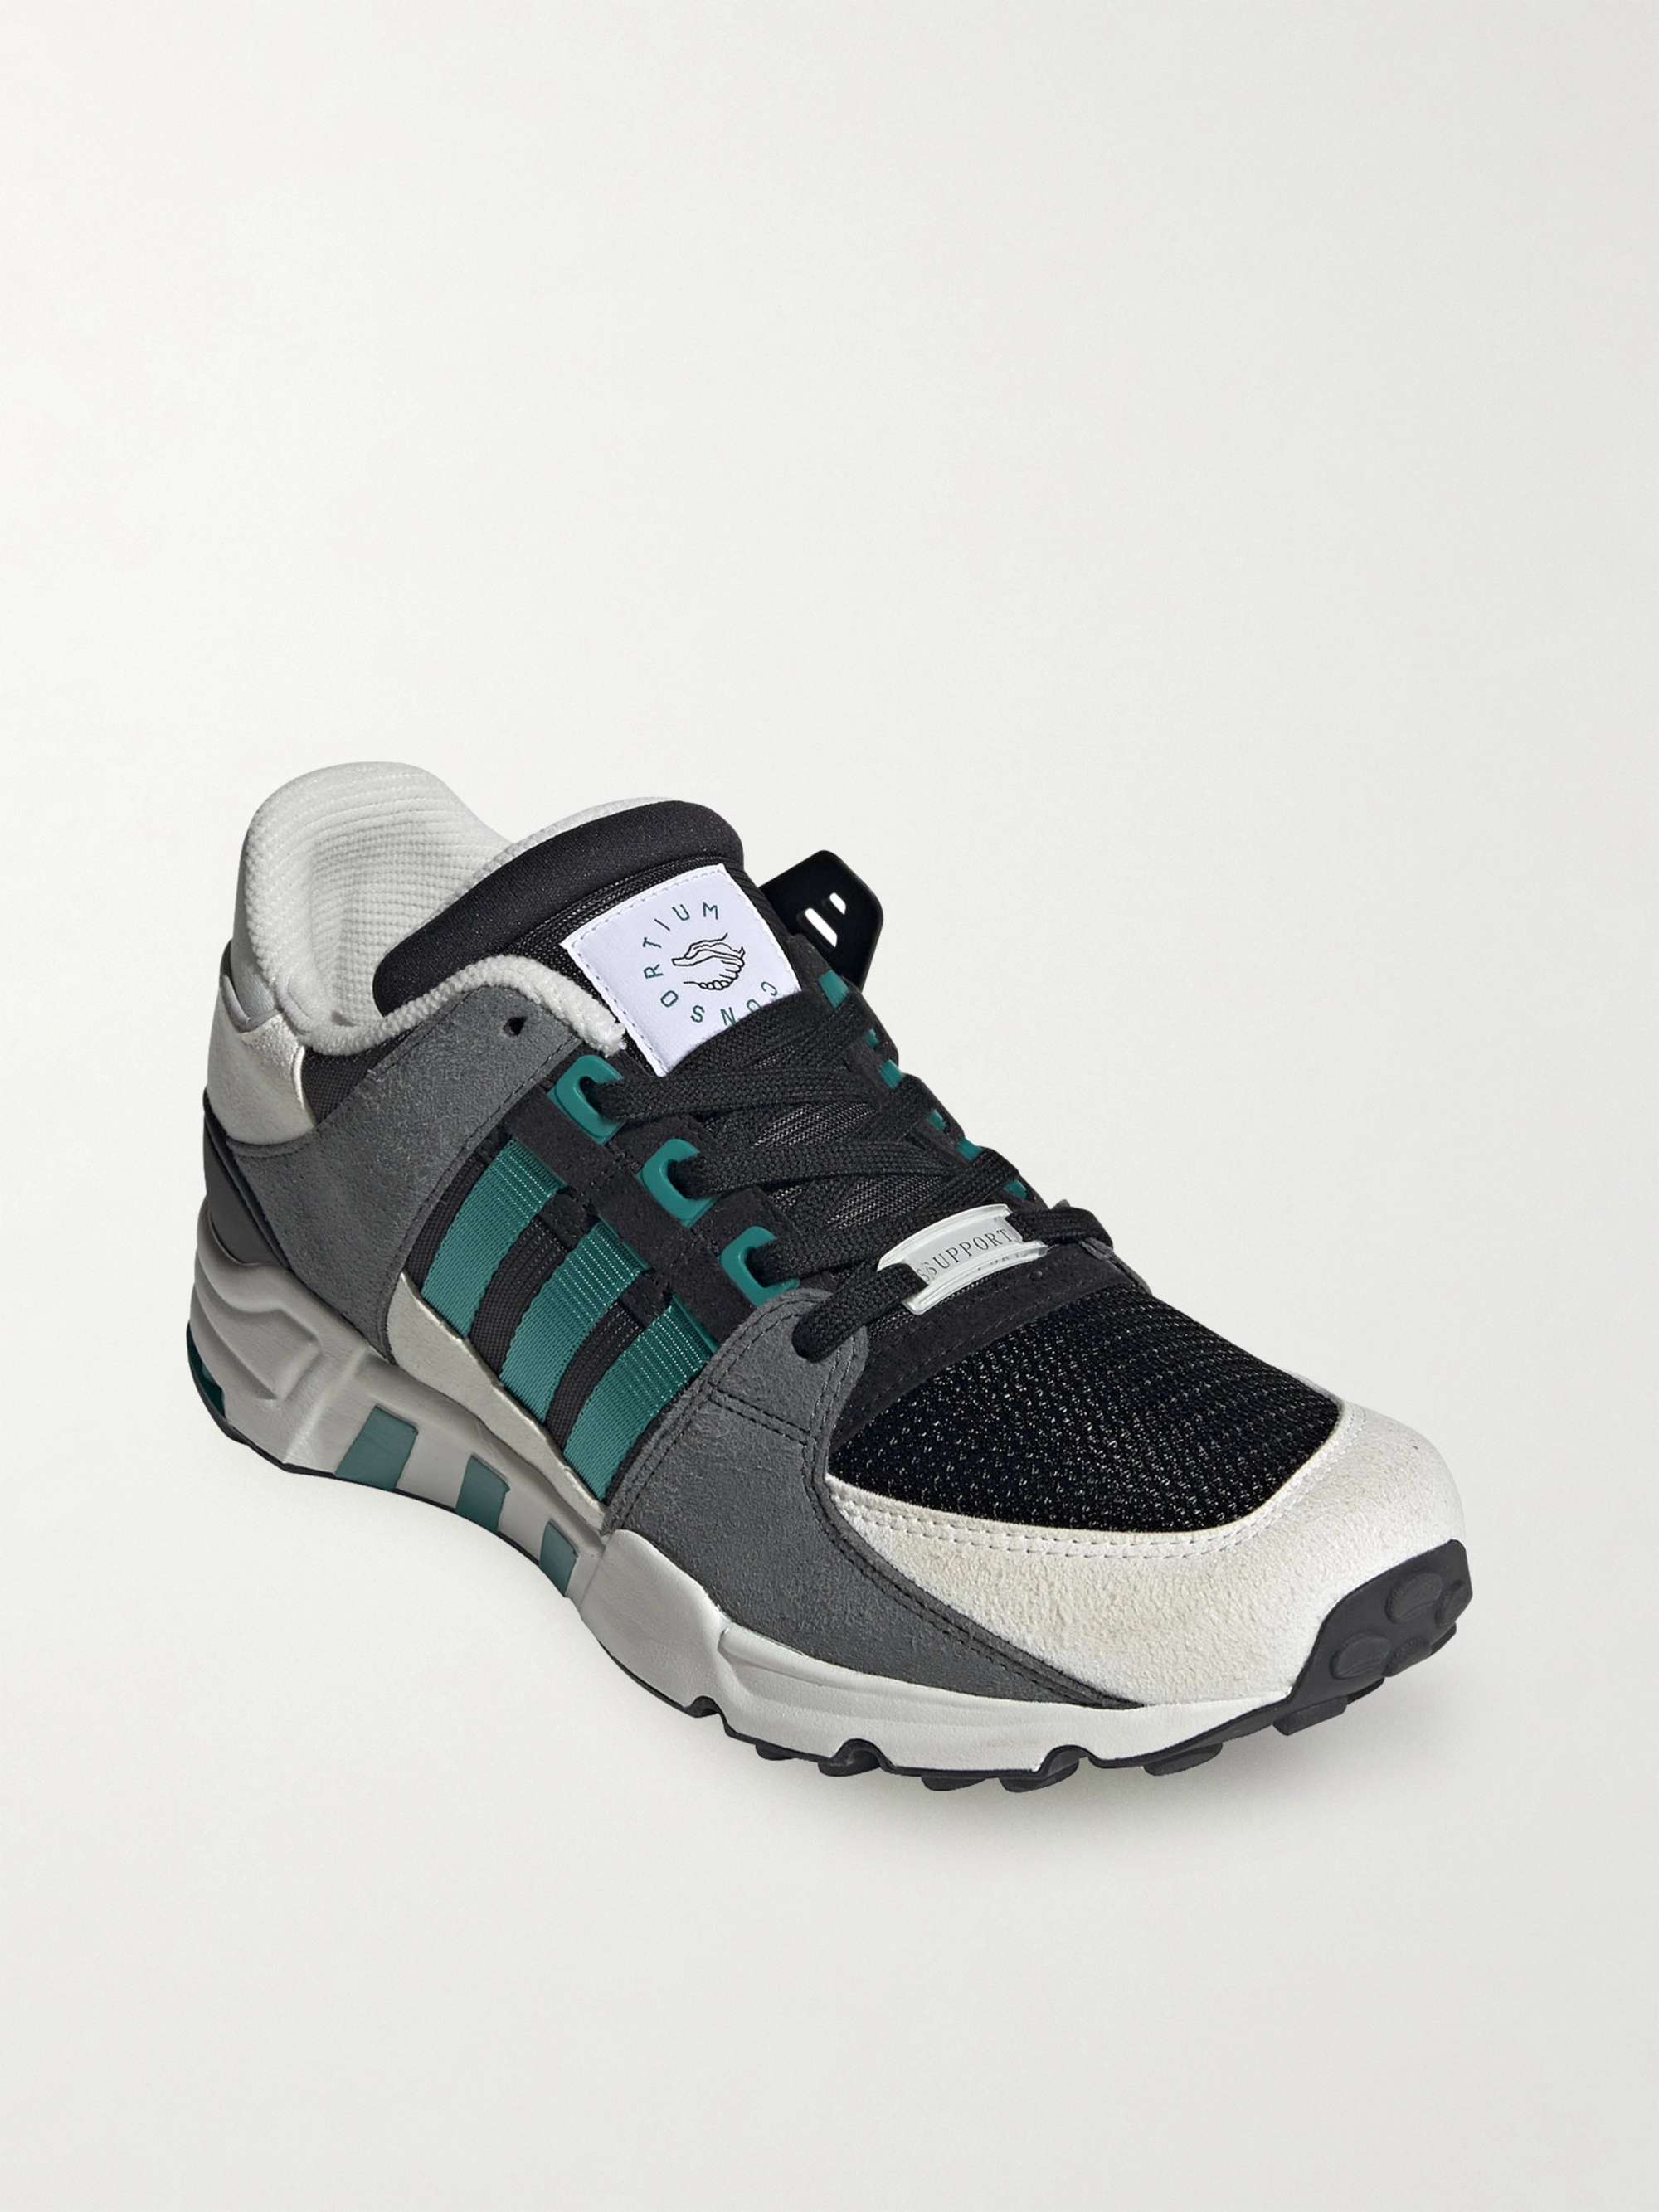 EQT Support 93 Canvas-Trimmed Suede 